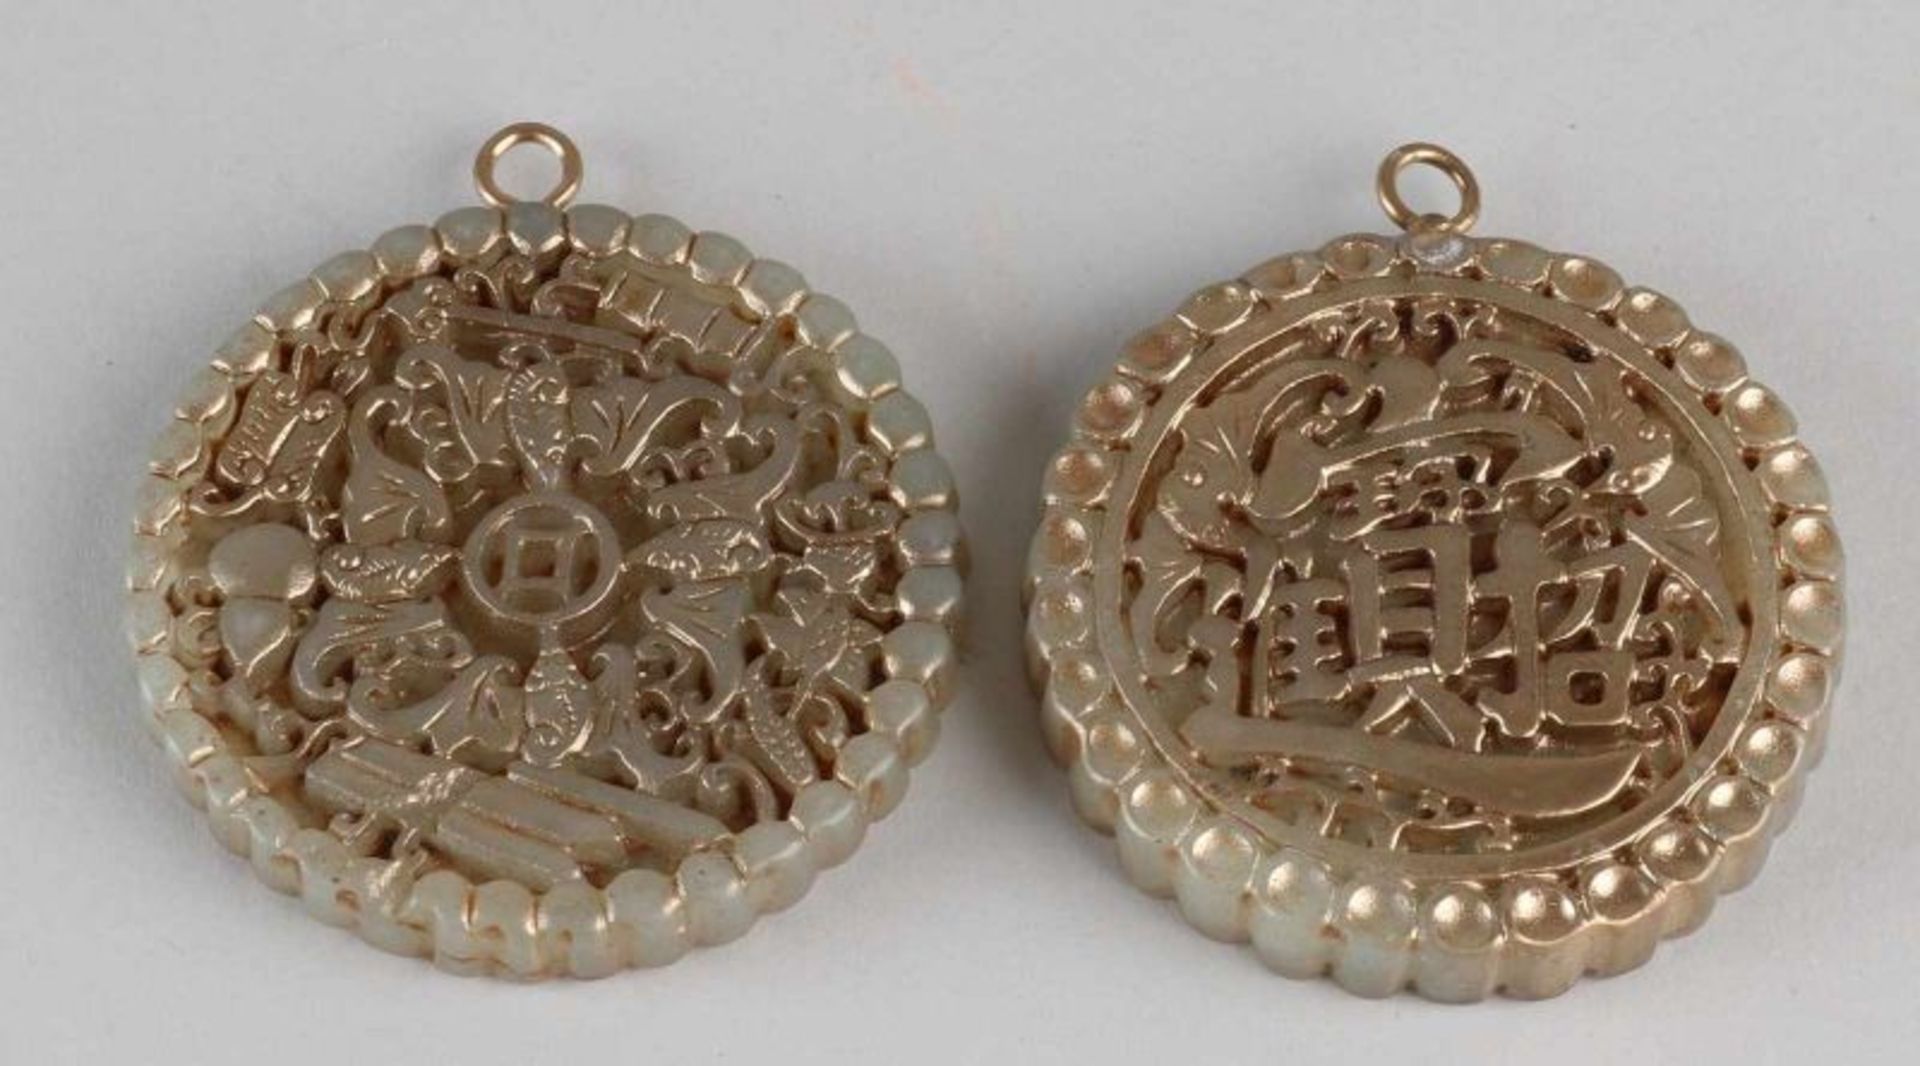 Two old gold-colored Chinese jade amulets with bats etc. Size: 7 - 7.5 cm ø. In good condition.